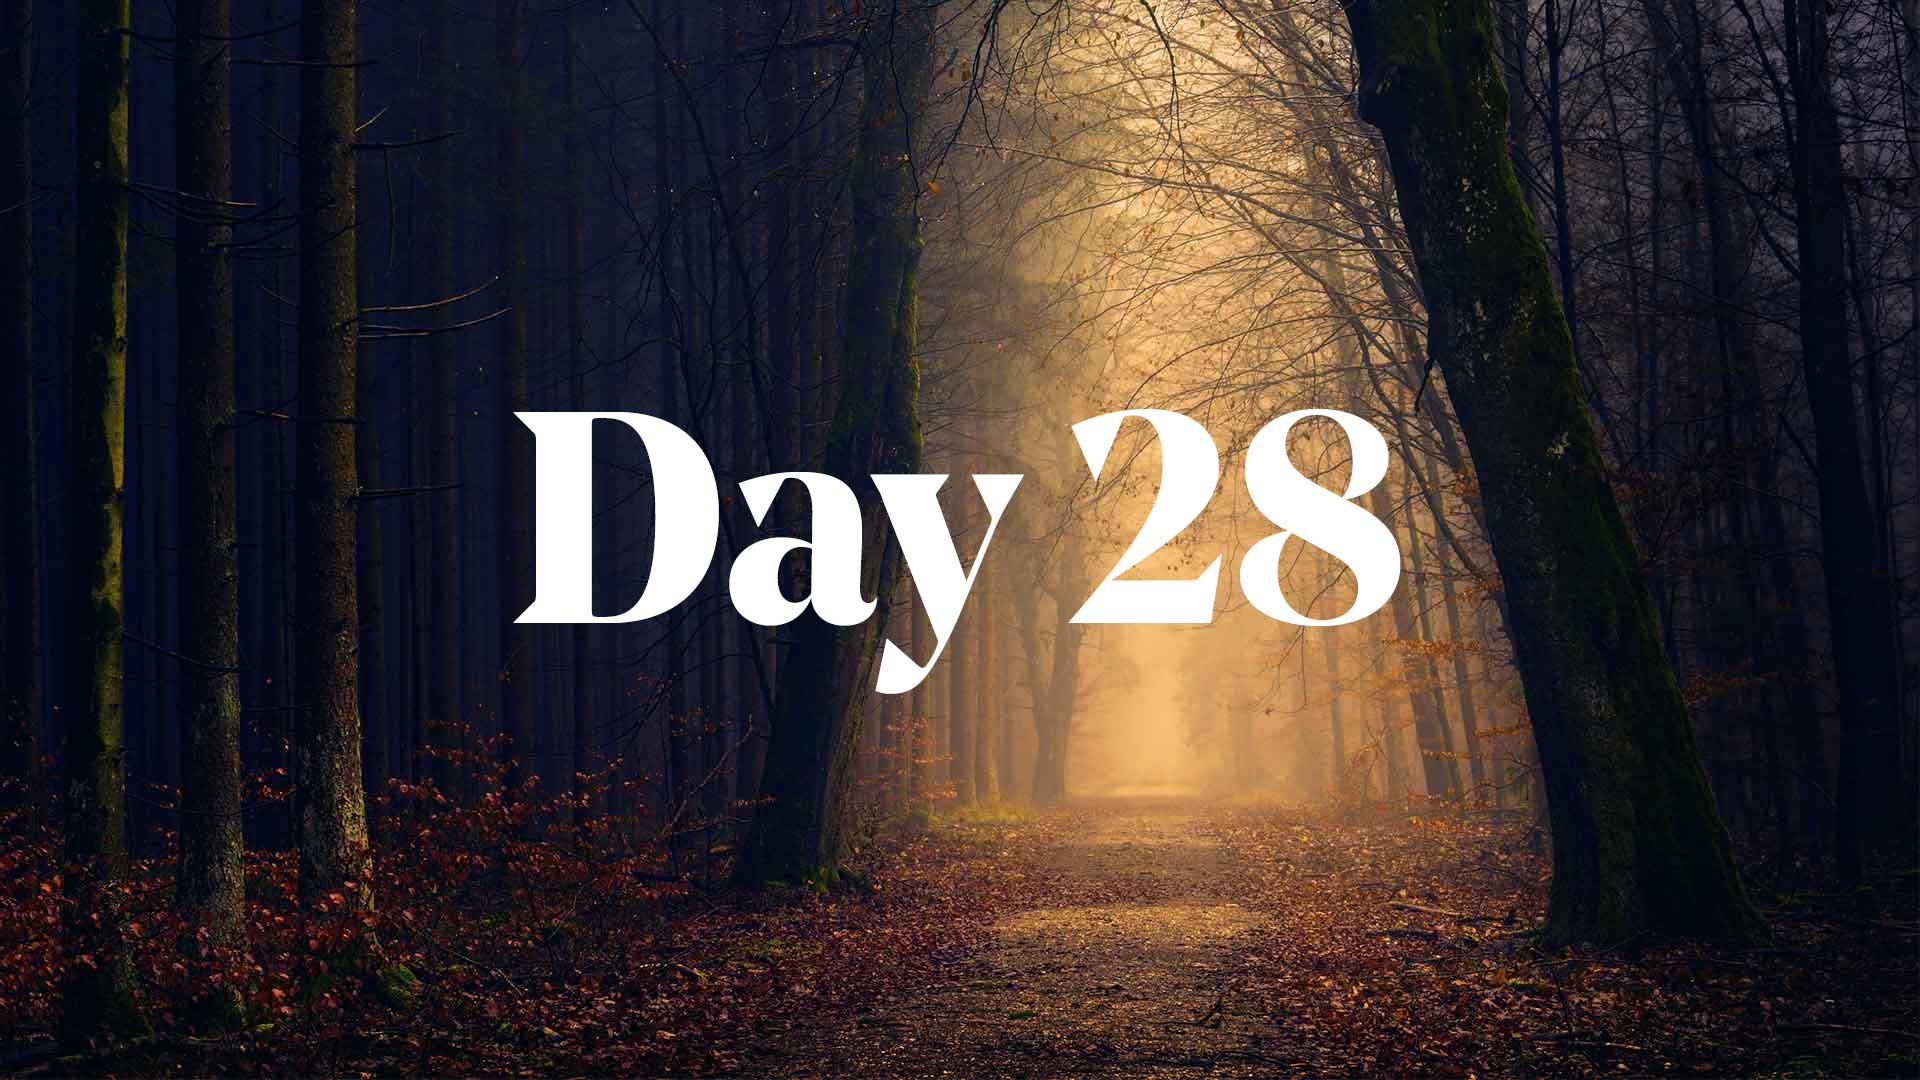 DAY28 